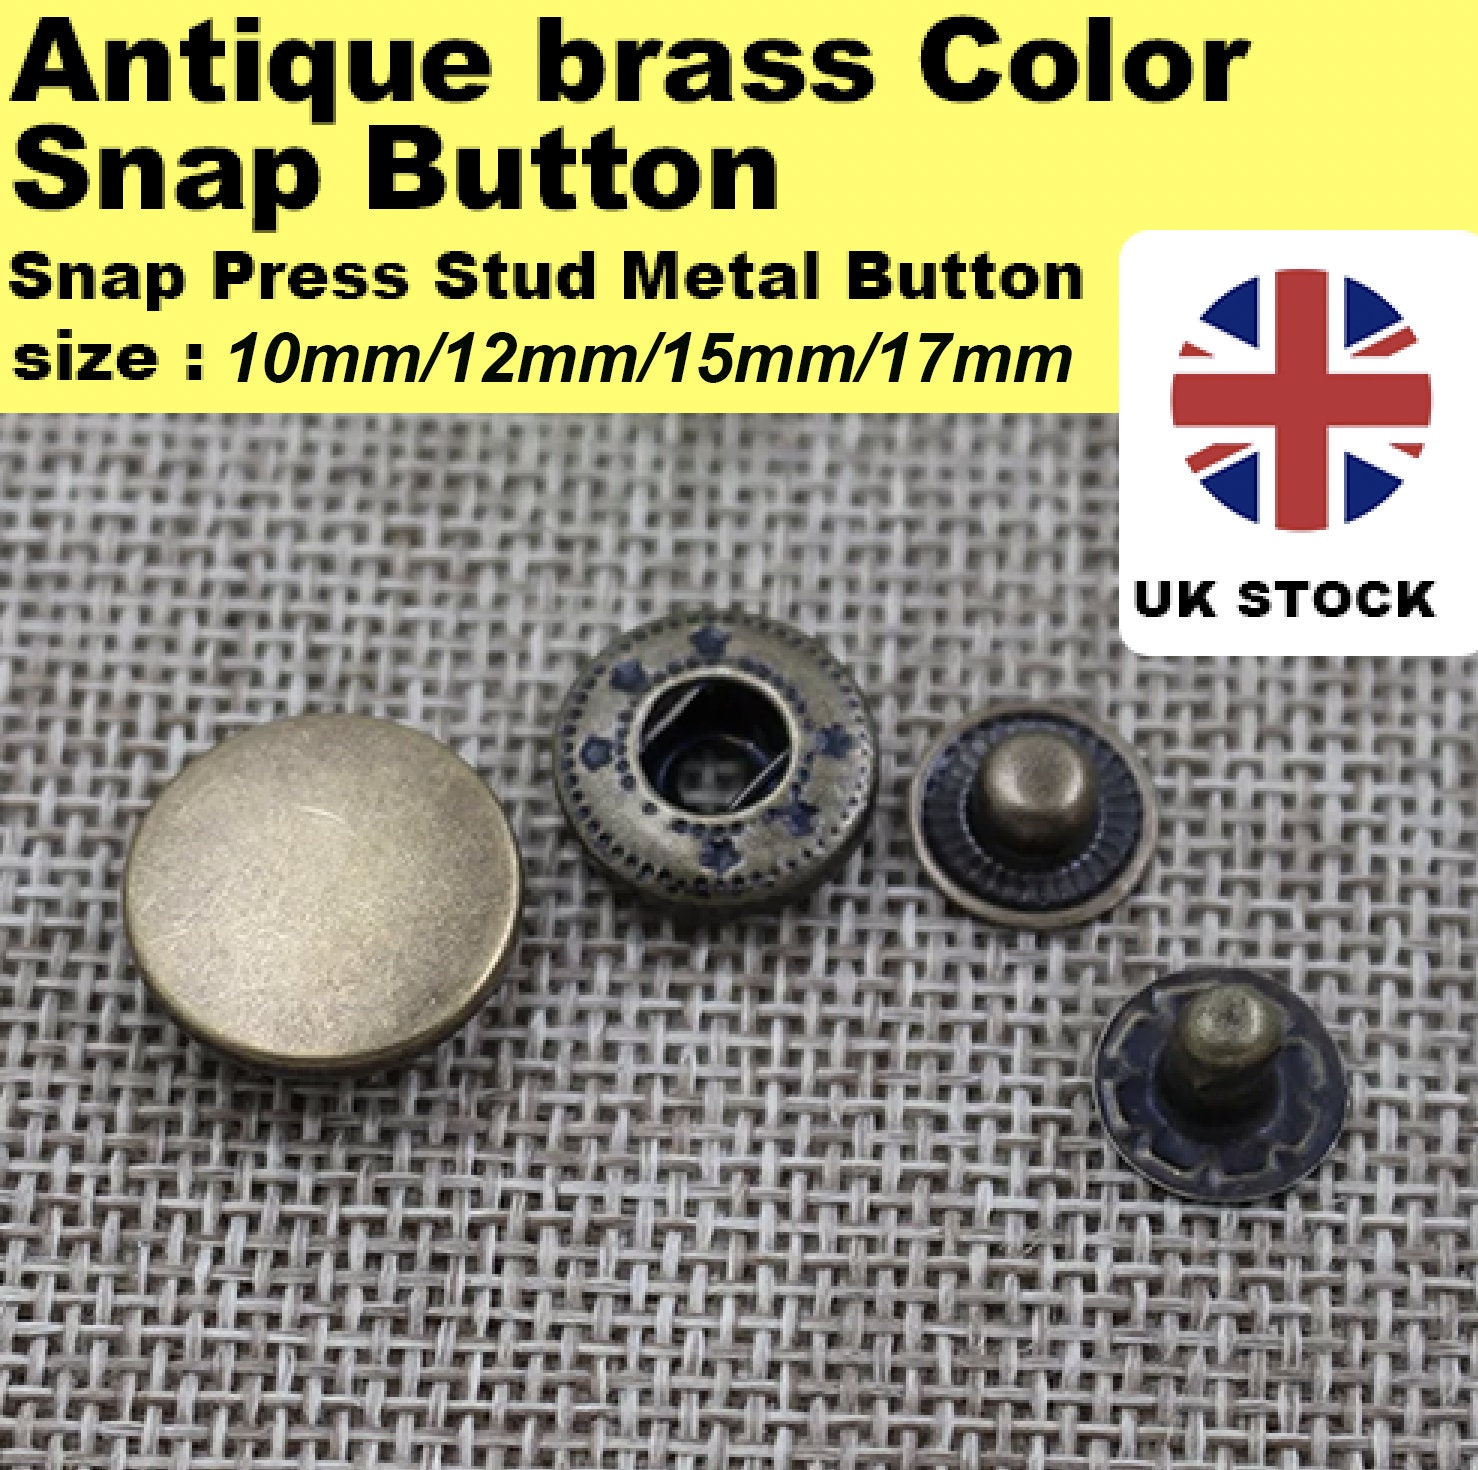 Fashion Spring Metal Snaps Dies Sets10mm,12.5mm,15mm,17mmheavy Duty Snaps  for Leather Snaps Button Metal Snap Fasteners Kit Snap Buttons 